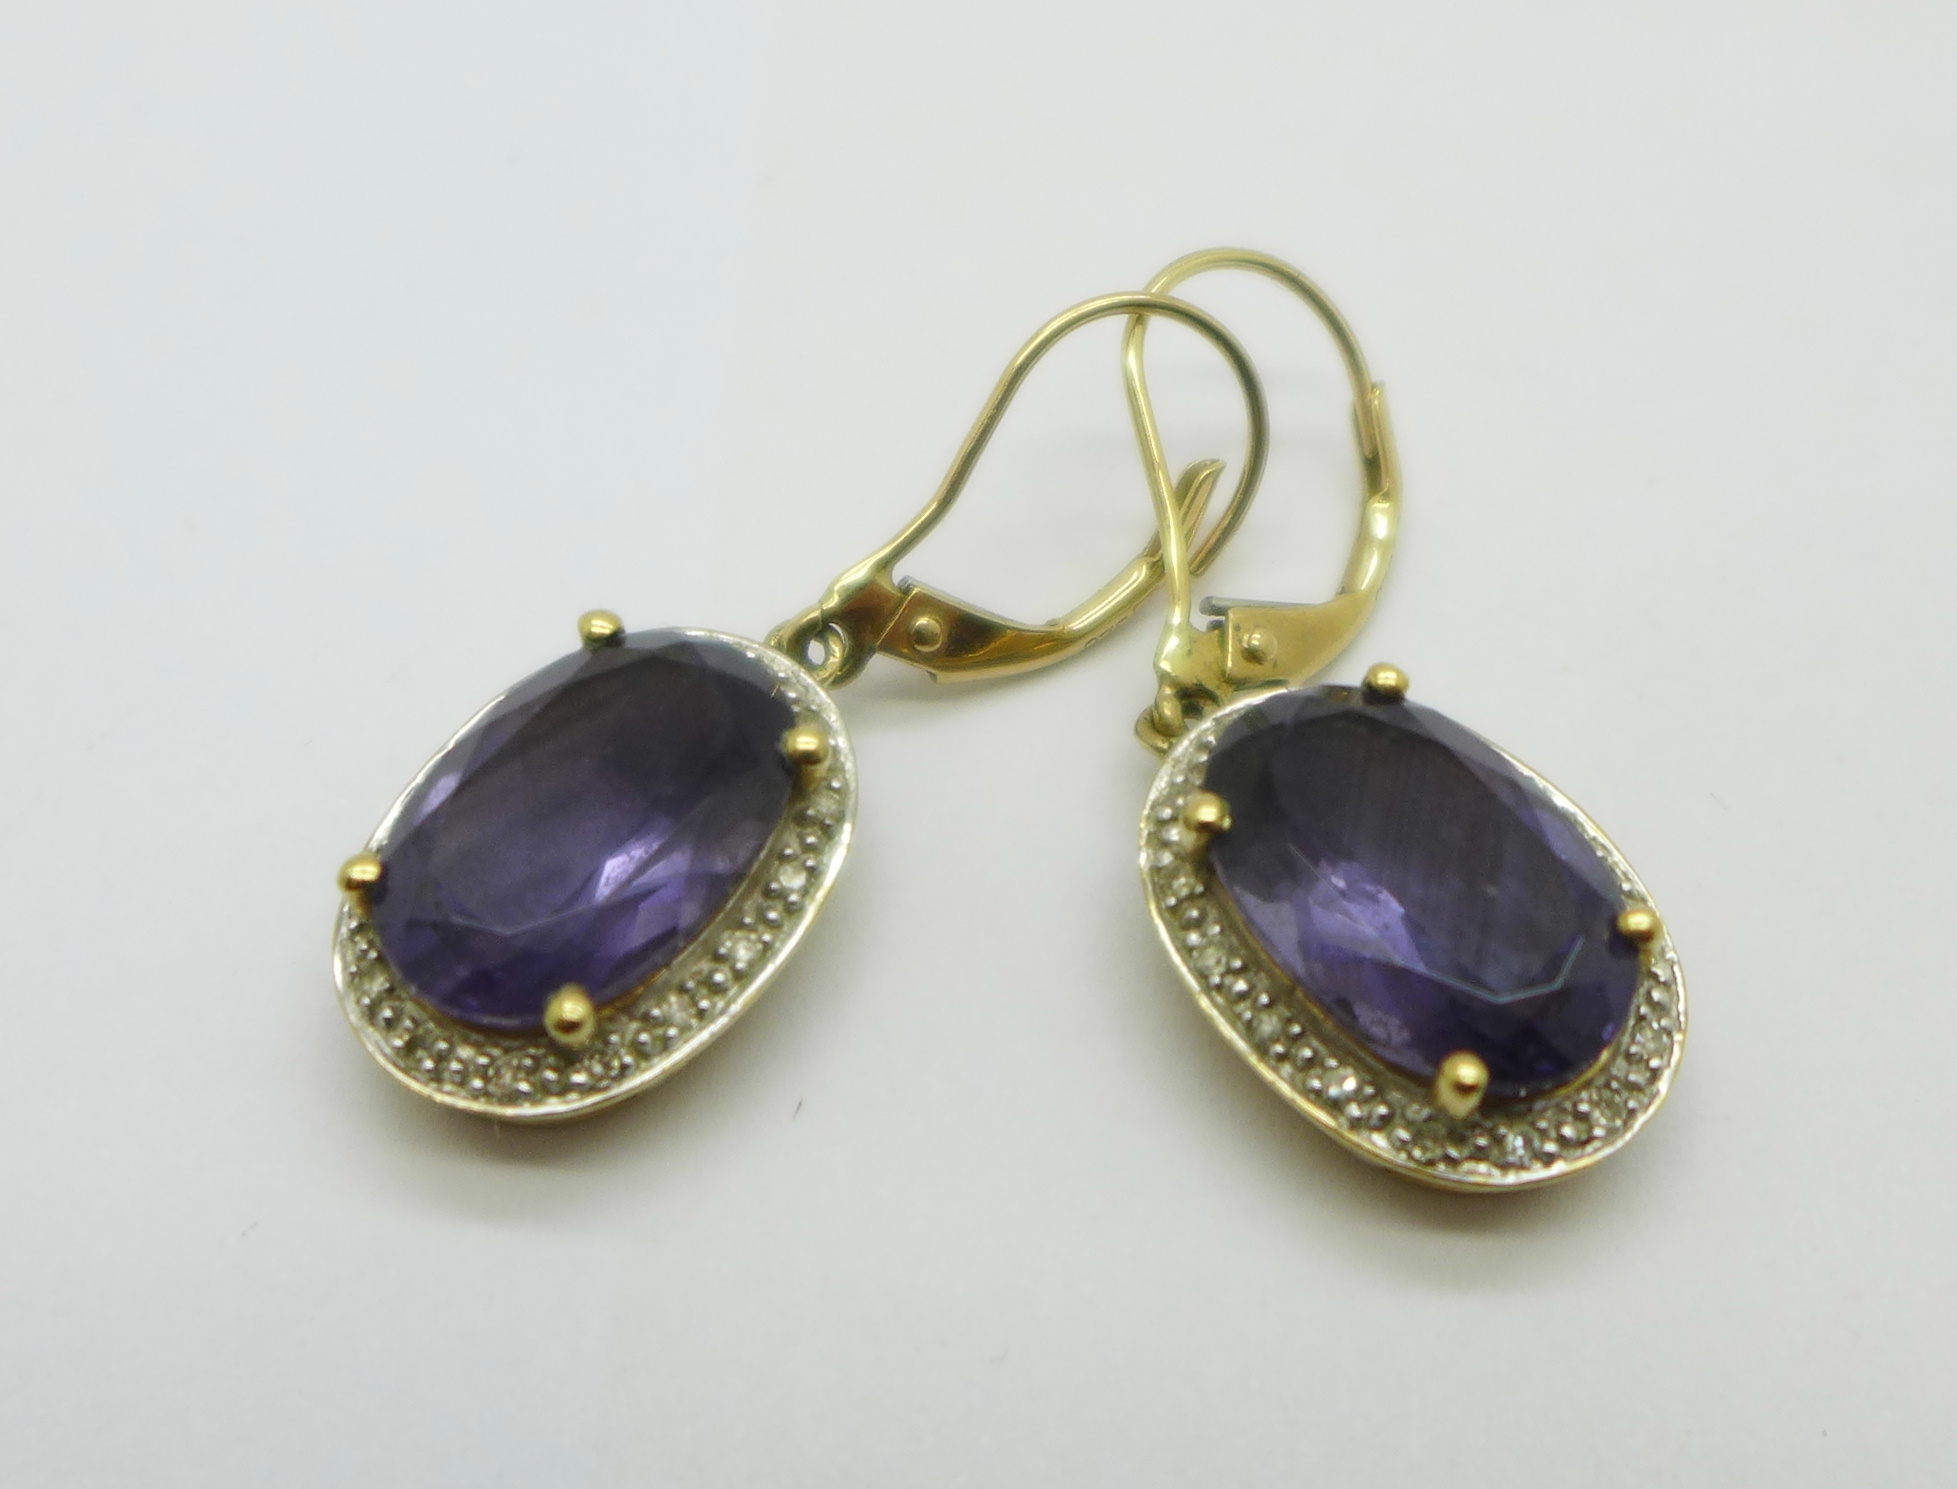 A pair of 9ct gold, amethyst and diamond pendant earrings, 4.1g, amethysts approximately 8mm x 11mm